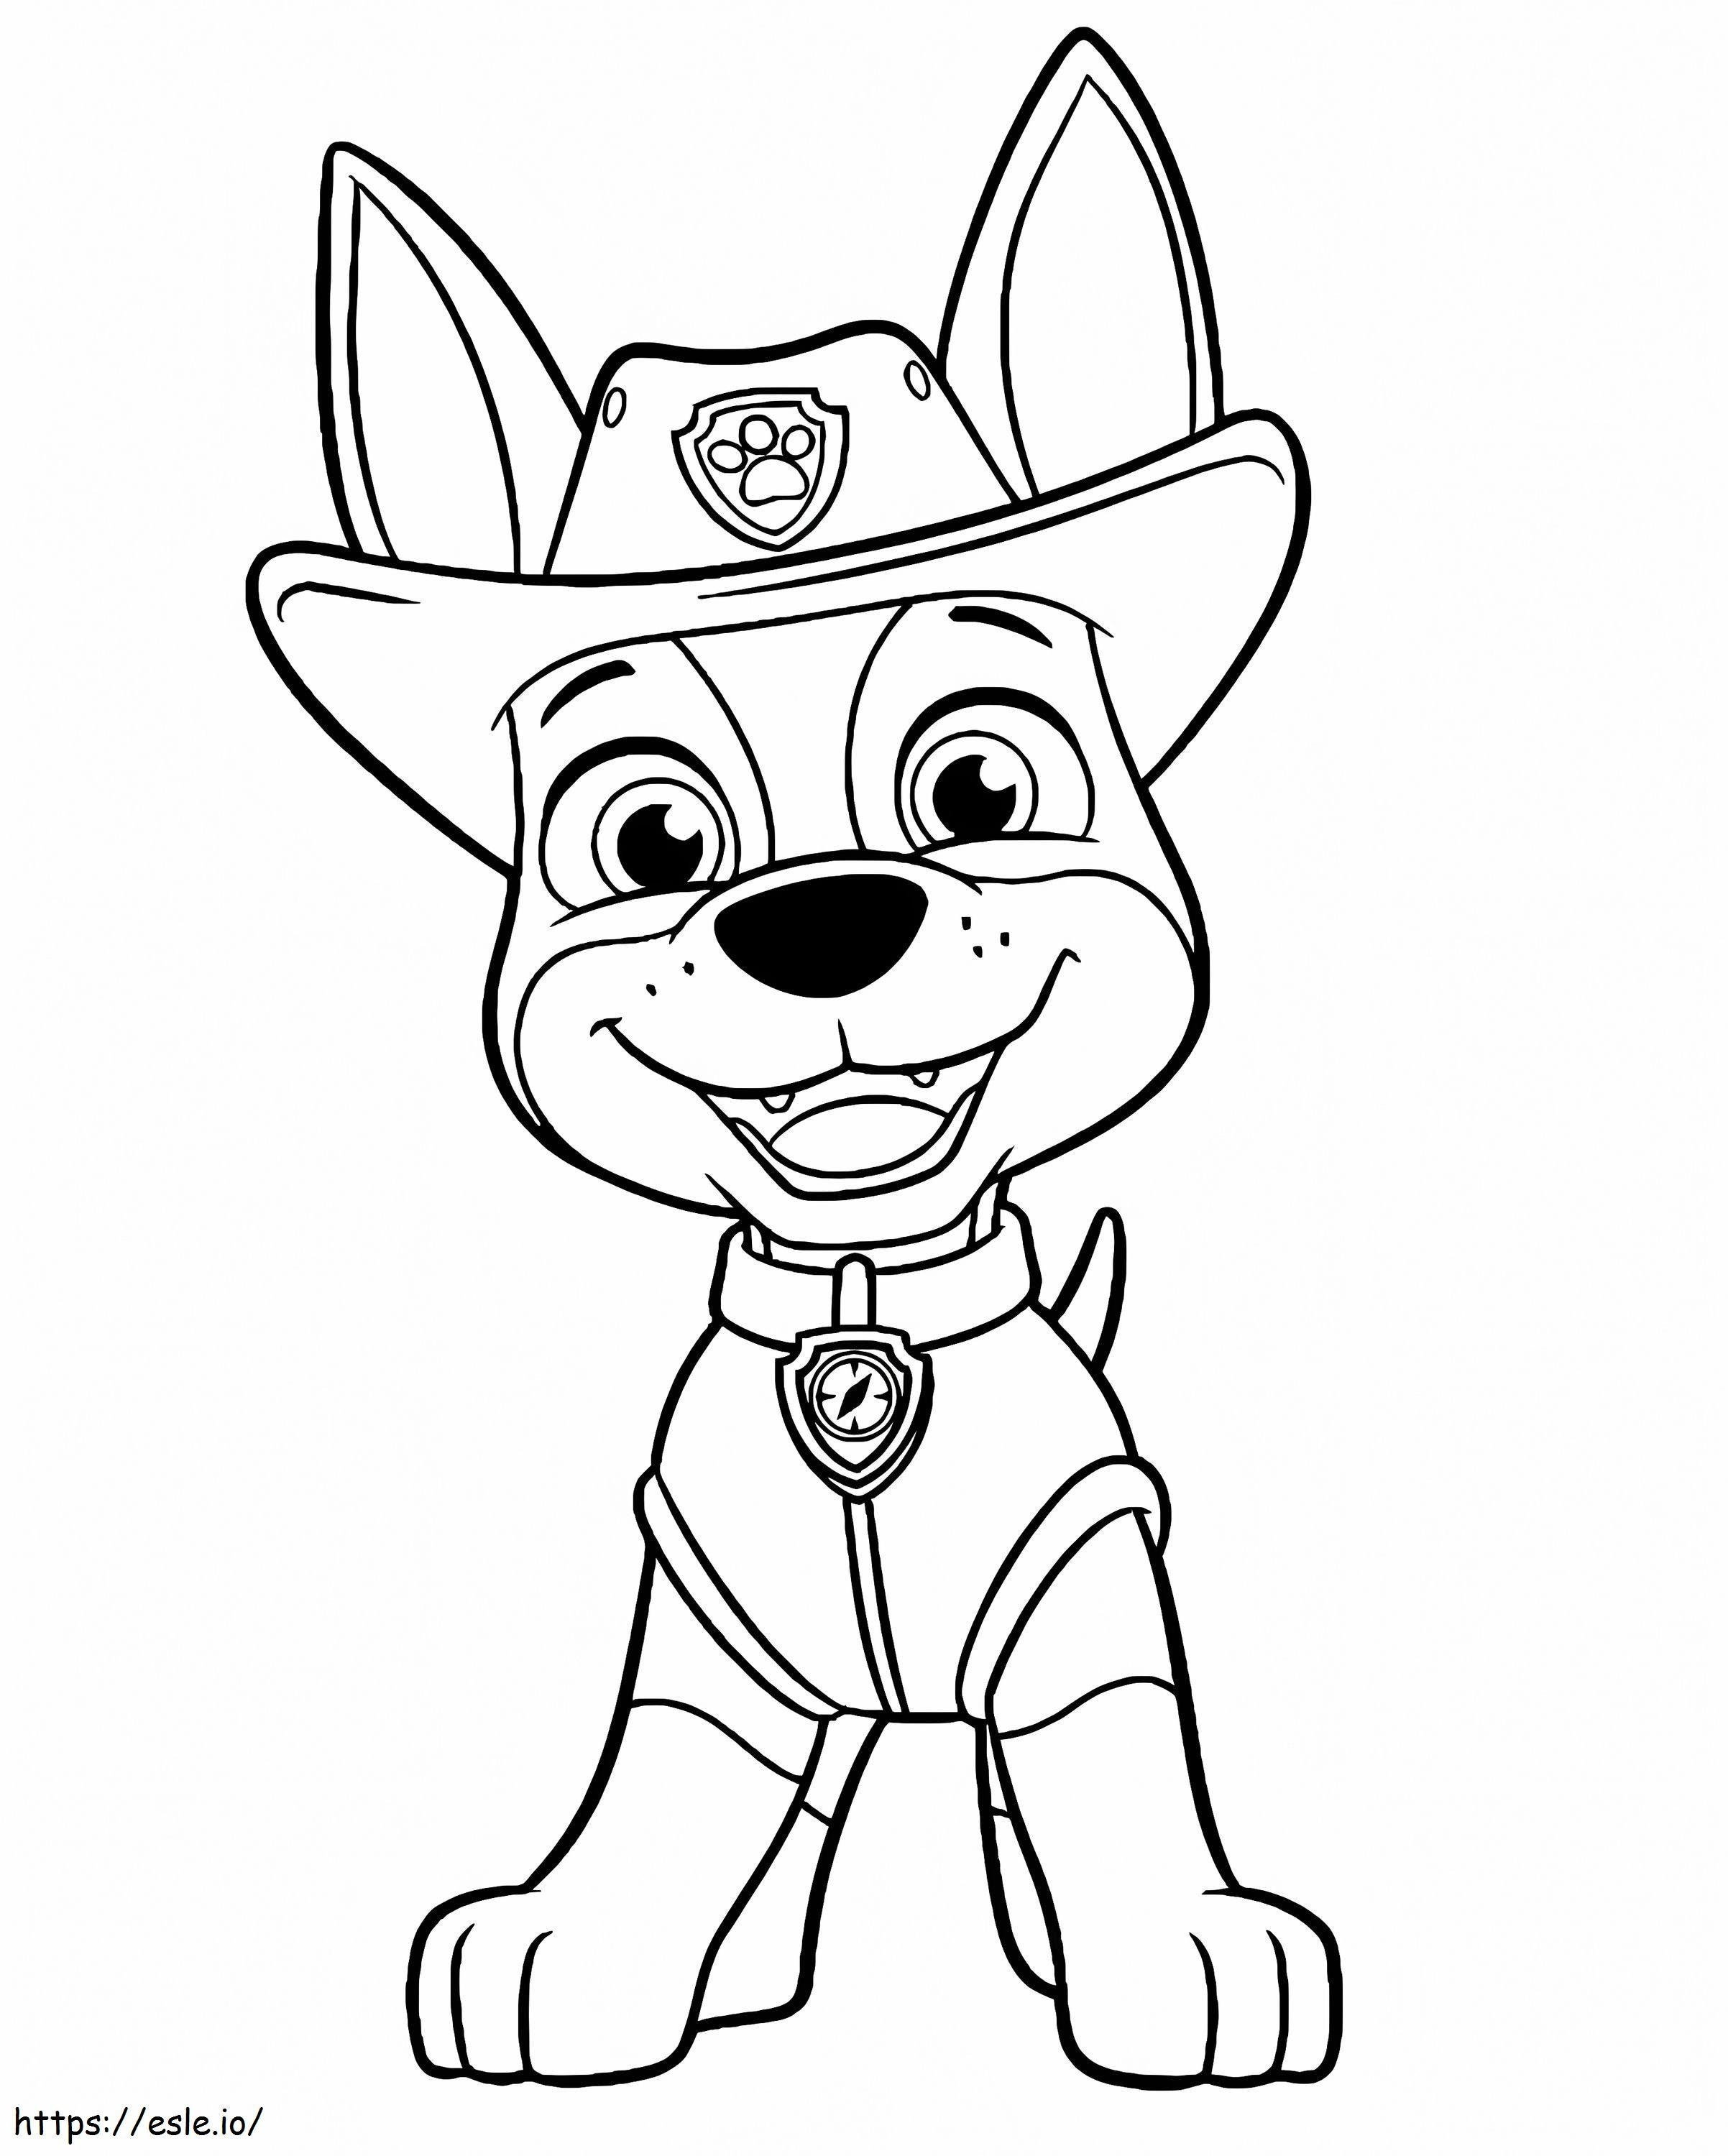 Happy Tracker coloring page